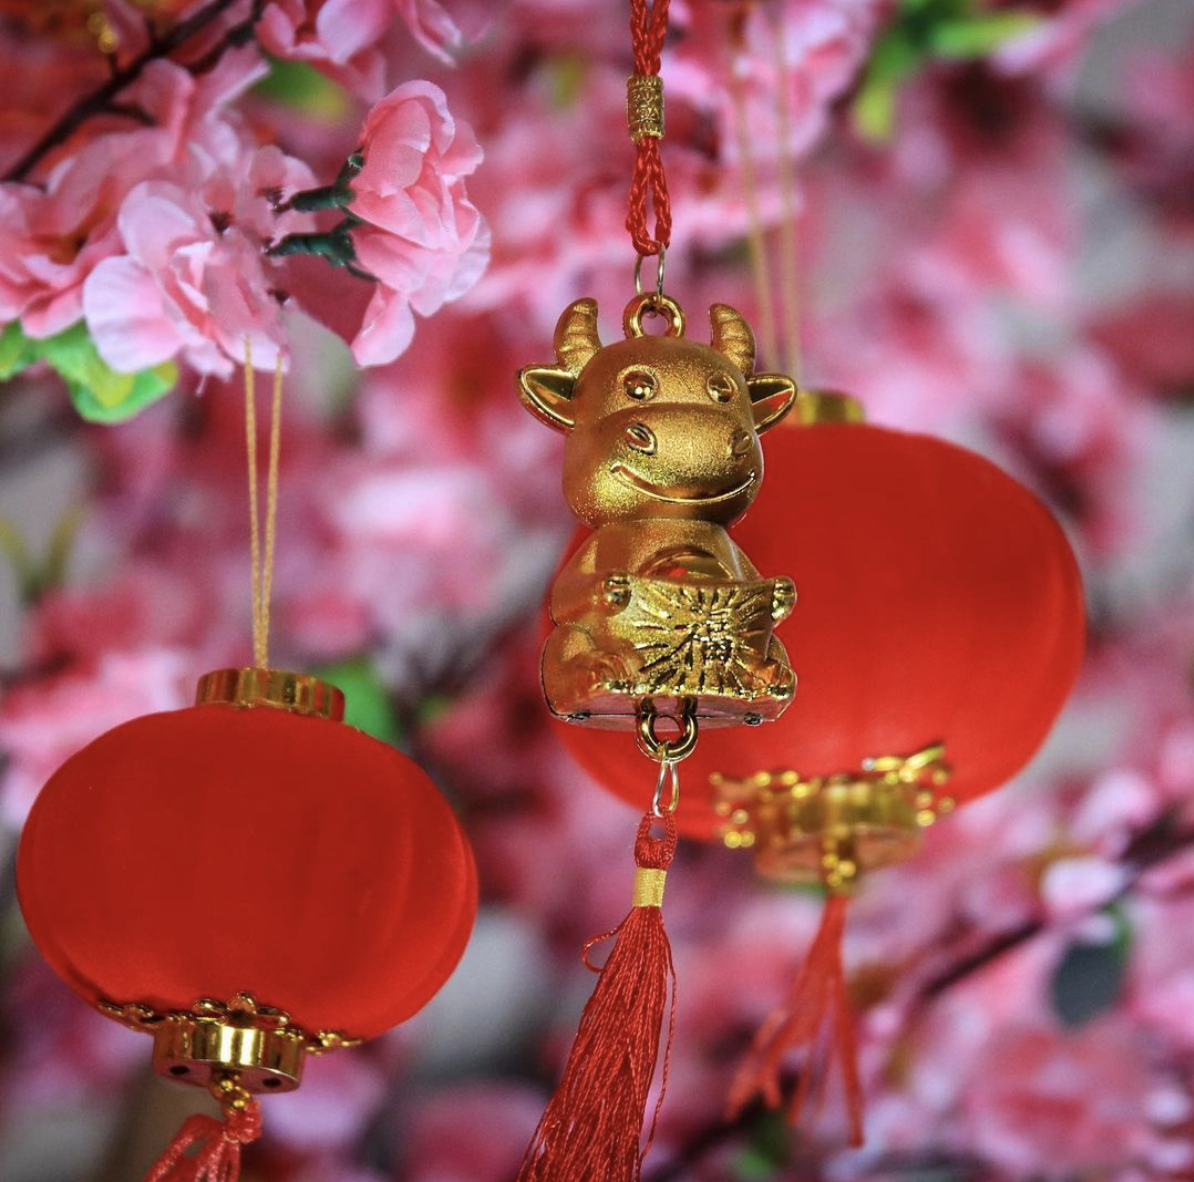 Happy Lunar New Year To You!